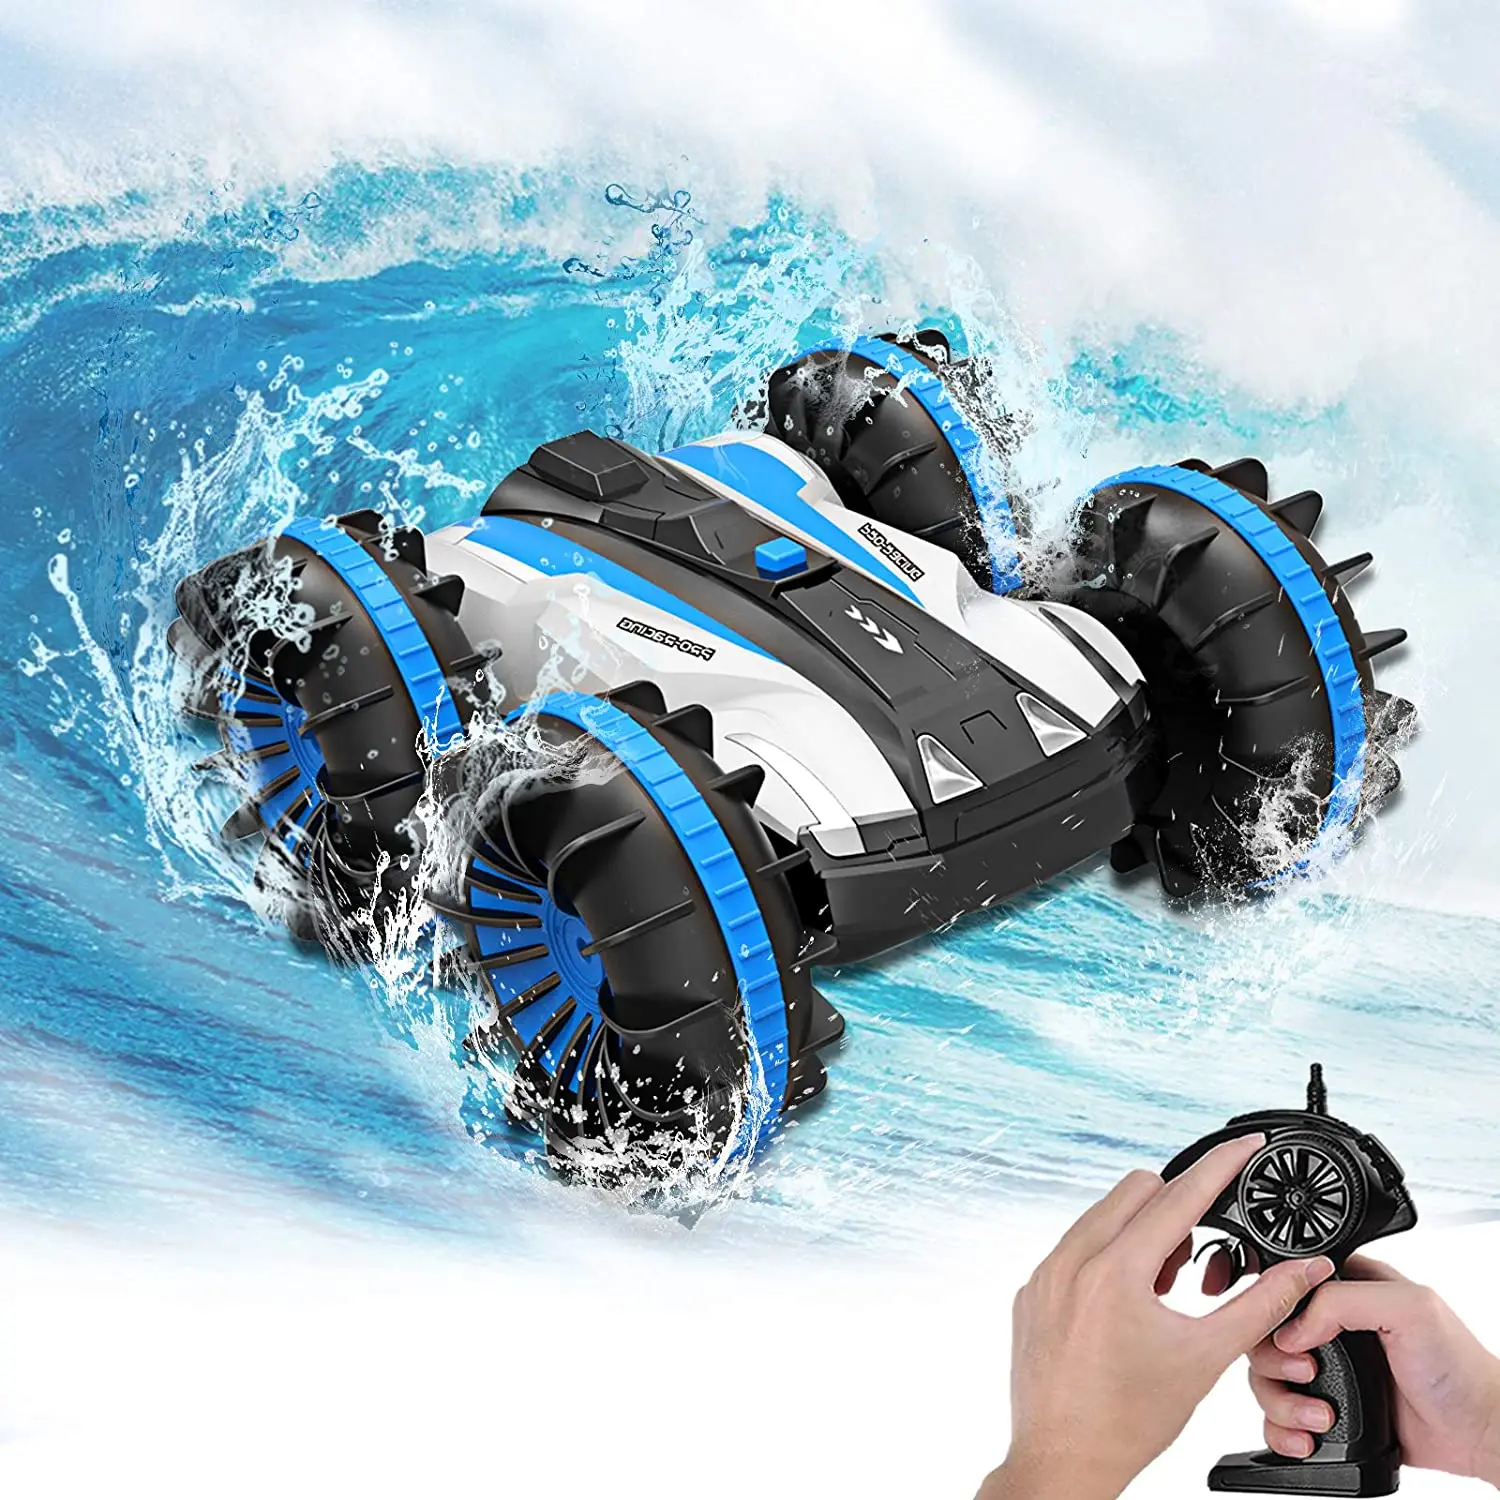 

Toys for 5-10 Year Old Boys Amphibious Car for Kids 2.4 GHz Remote Control Boat Waterproof RC Monster Truck Stunt Car 4WD